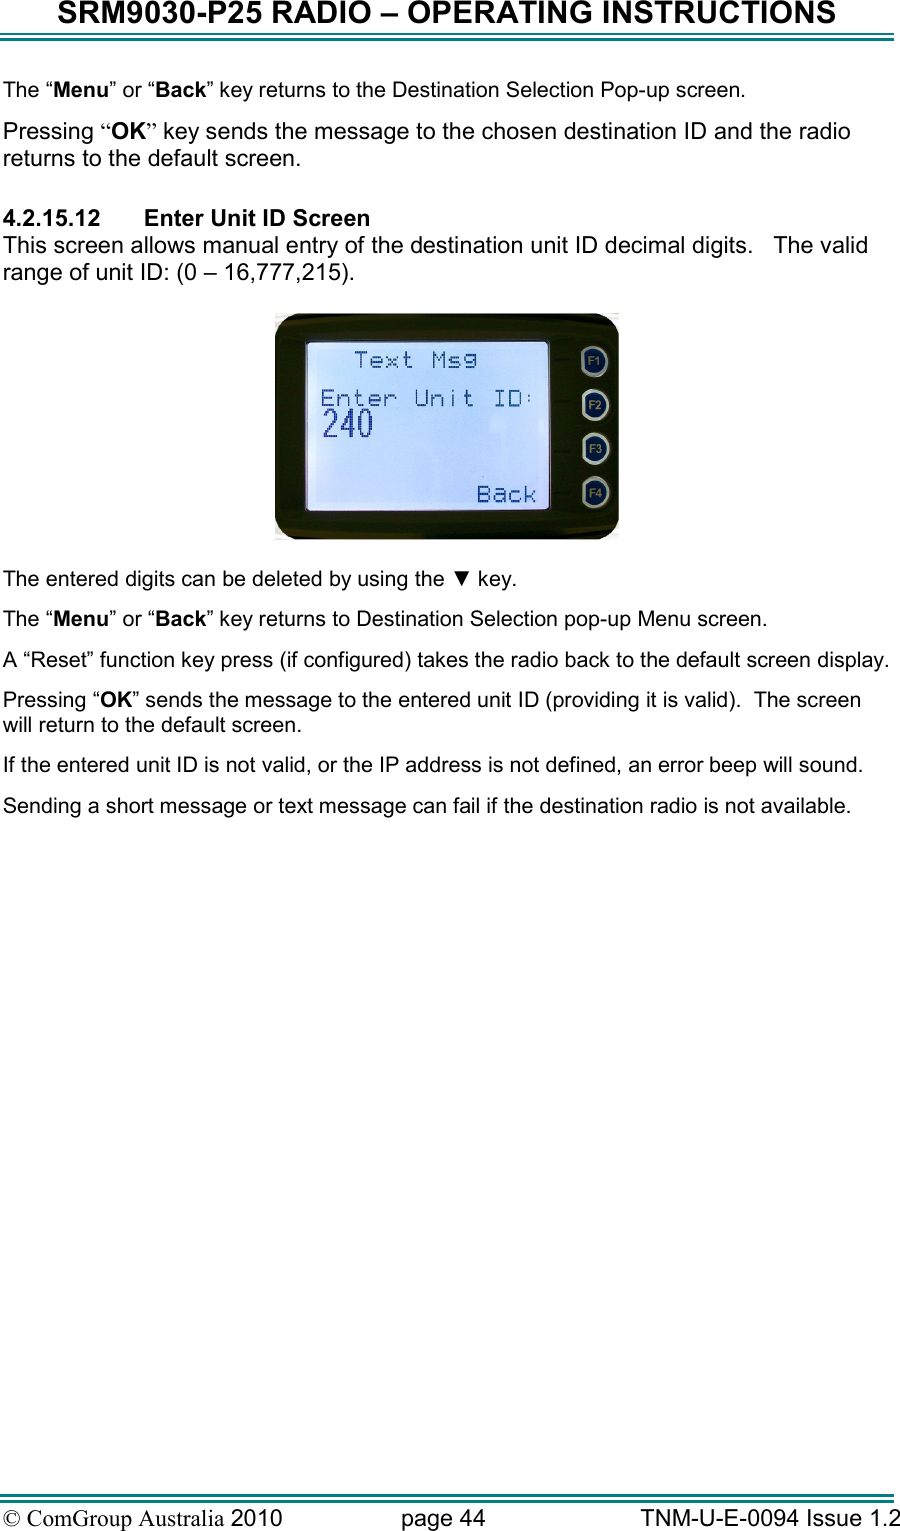 SRM9030-P25 RADIO – OPERATING INSTRUCTIONS © ComGroup Australia 2010  page 44   TNM-U-E-0094 Issue 1.2 The “Menu” or “Back” key returns to the Destination Selection Pop-up screen. Pressing “OK” key sends the message to the chosen destination ID and the radio returns to the default screen.  4.2.15.12  Enter Unit ID Screen This screen allows manual entry of the destination unit ID decimal digits.   The valid range of unit ID: (0 – 16,777,215).    The entered digits can be deleted by using the ▼ key. The “Menu” or “Back” key returns to Destination Selection pop-up Menu screen. A “Reset” function key press (if configured) takes the radio back to the default screen display. Pressing “OK” sends the message to the entered unit ID (providing it is valid).  The screen will return to the default screen.  If the entered unit ID is not valid, or the IP address is not defined, an error beep will sound.   Sending a short message or text message can fail if the destination radio is not available. 